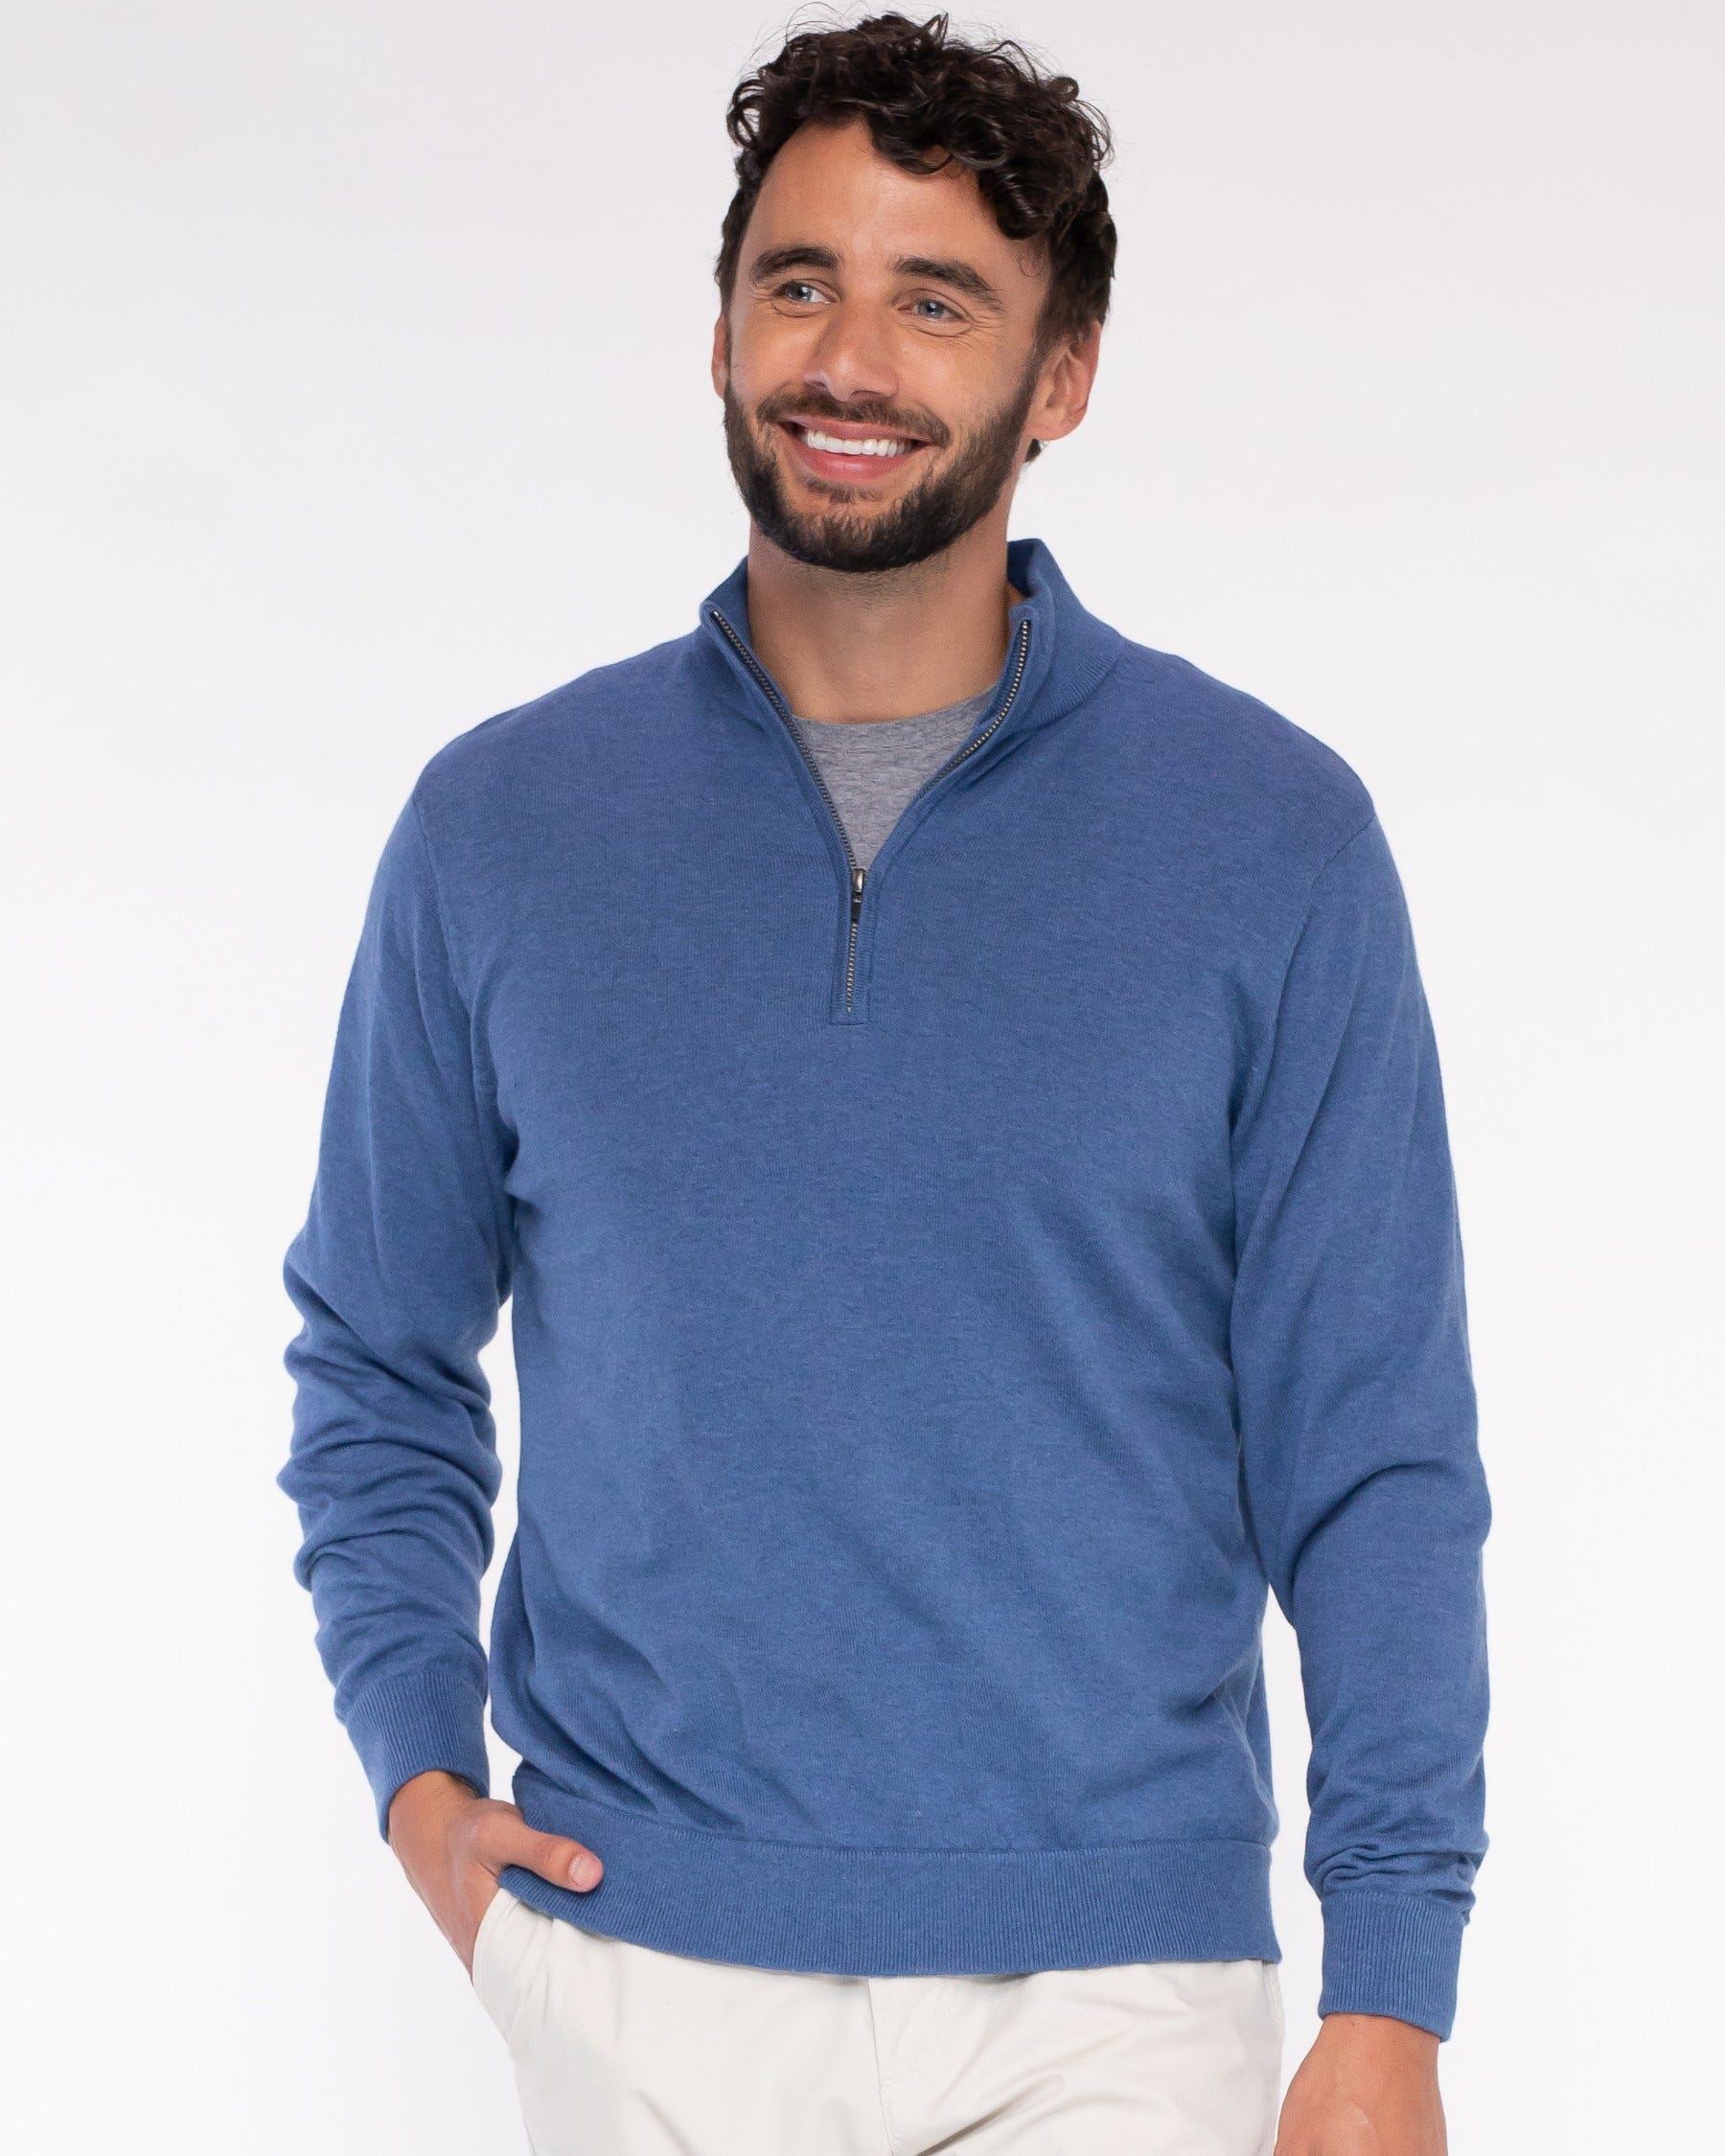 1/4 Zip Mock Neck Cotton Cashmere Blend Pullover Sweater (Choice of Colors) by Alashan Cashmere